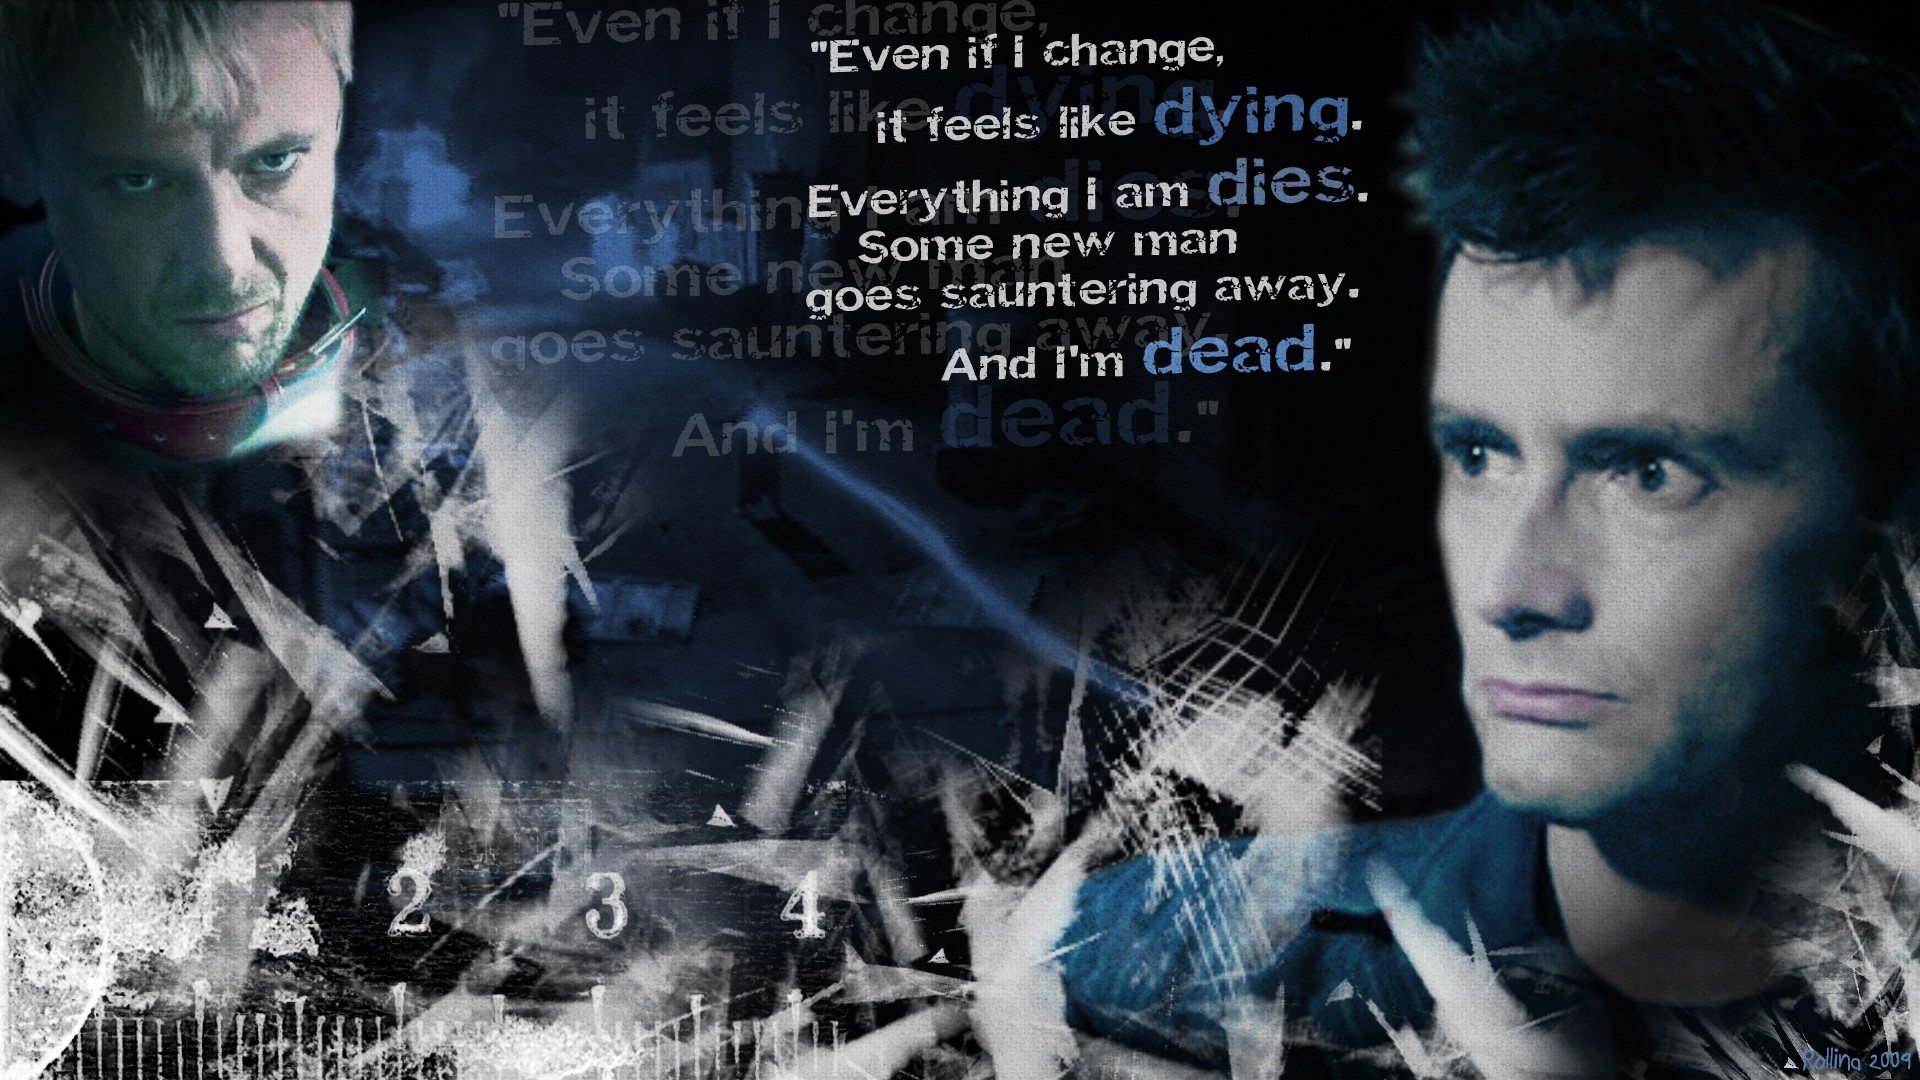 Doctor Who The Doctor TARDiS David Tennant The Master John Simm Tenth Doctor Quote 1920x1080